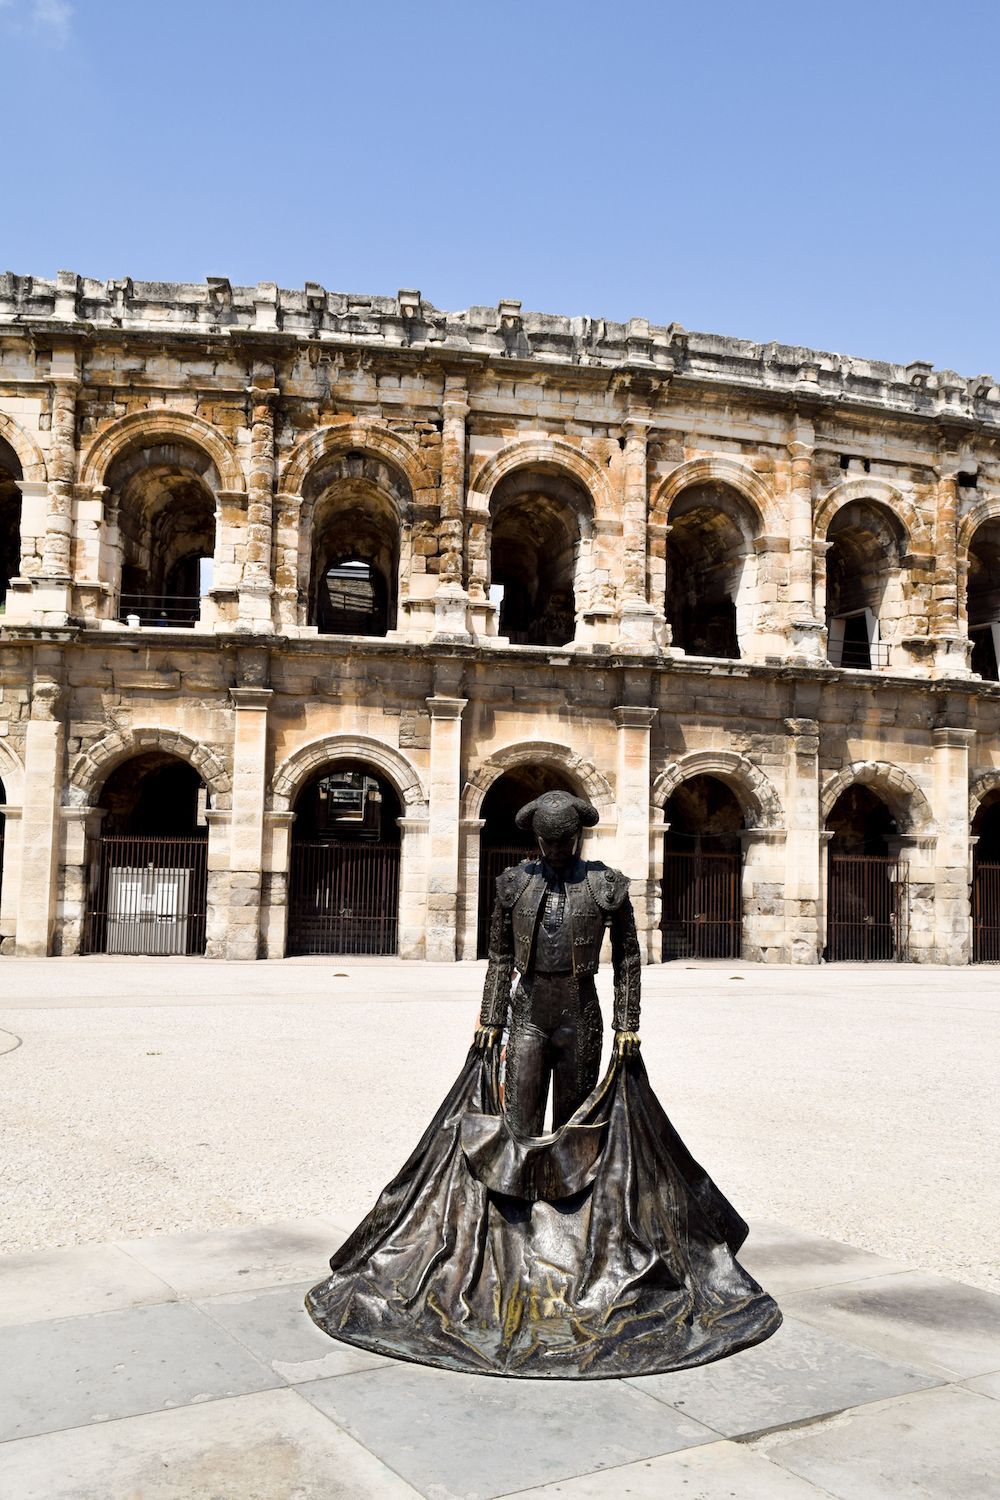 See ruins of the Roman Empire in France: Nîmes Amphitheatre